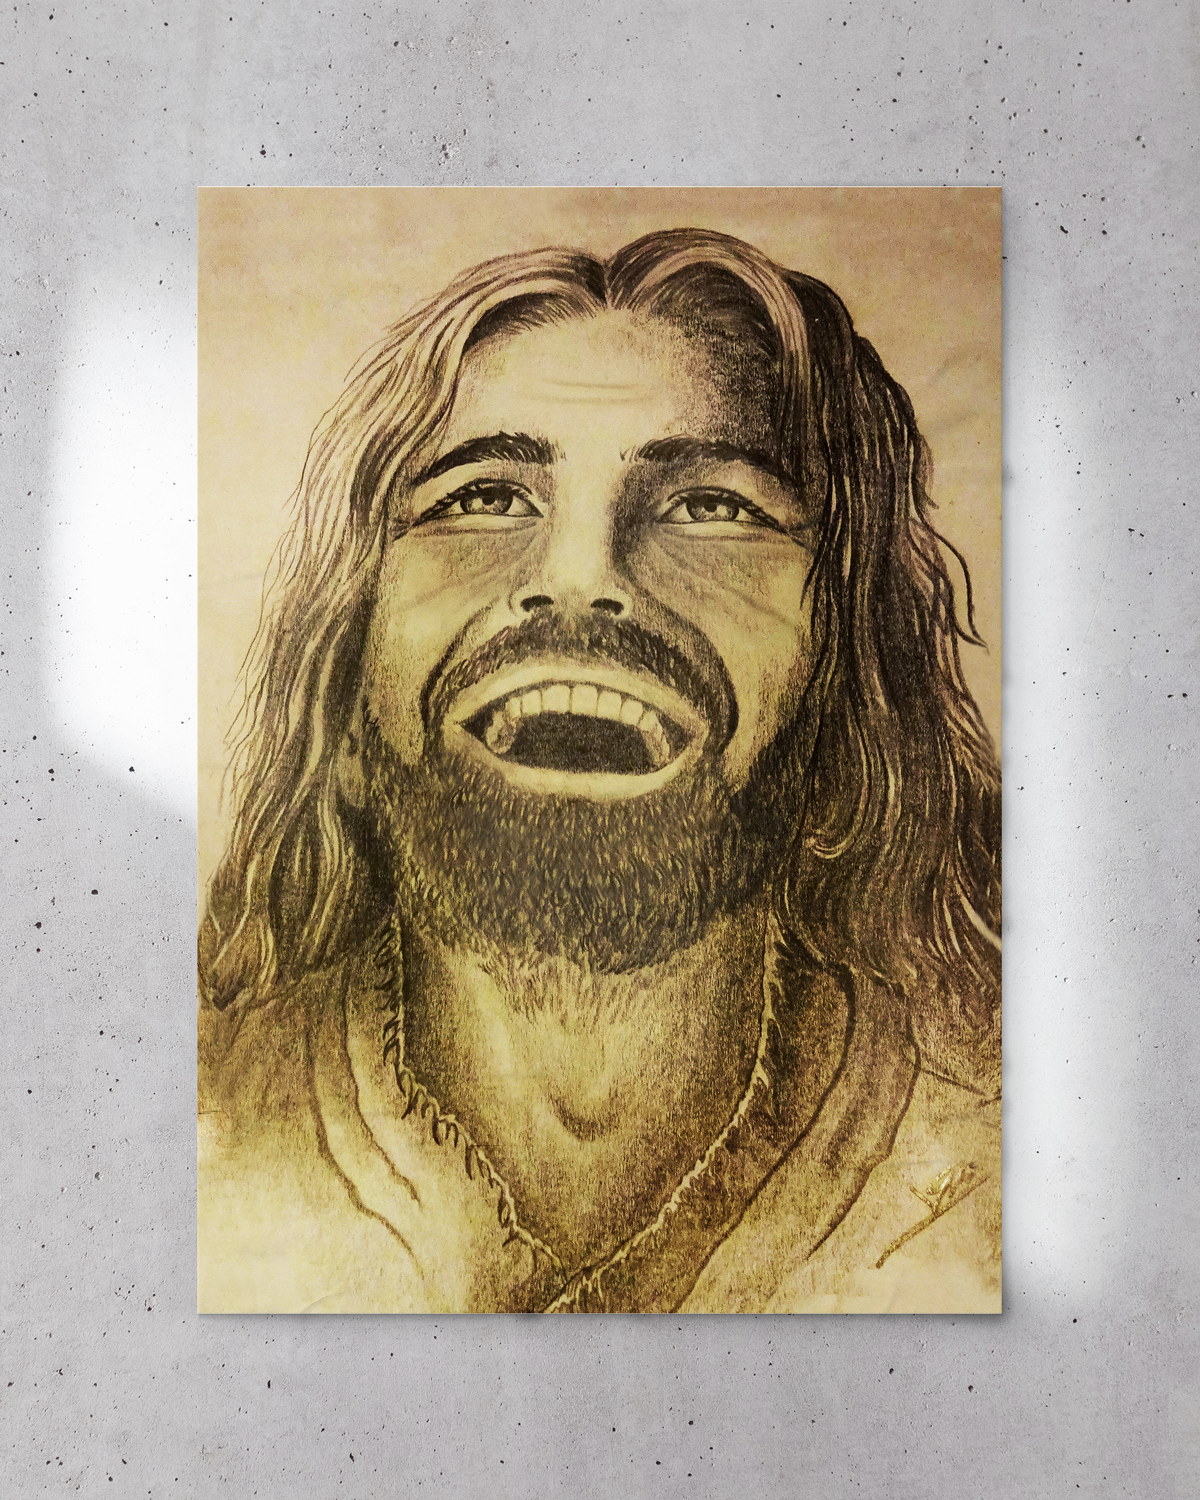 Jesus christ digital cartoon. Hand drawn vector illustration or drawing of jesus  christ good with open hands in a cartoon | CanStock